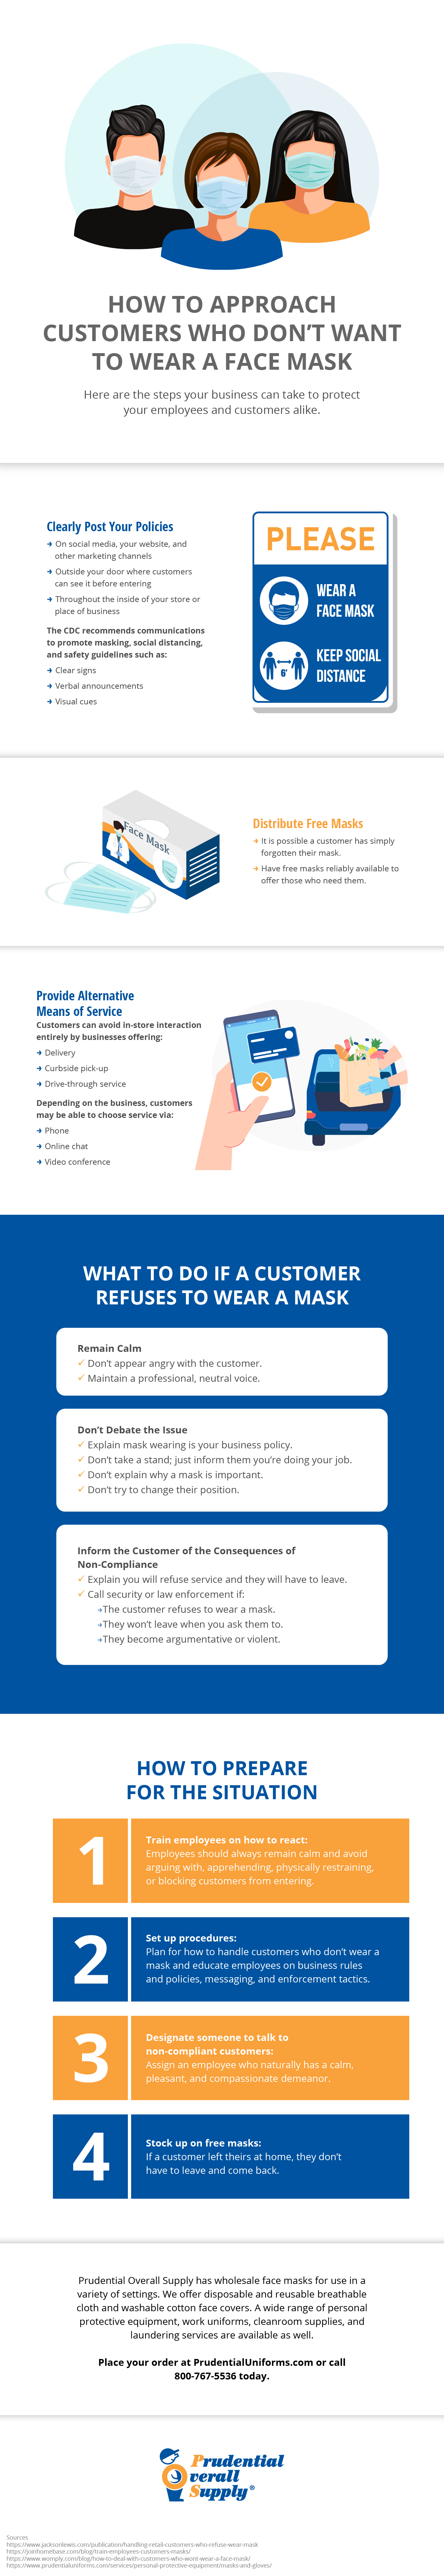 How to Approach Customers Who Don’t Want to Wear a Face Mask Infographic